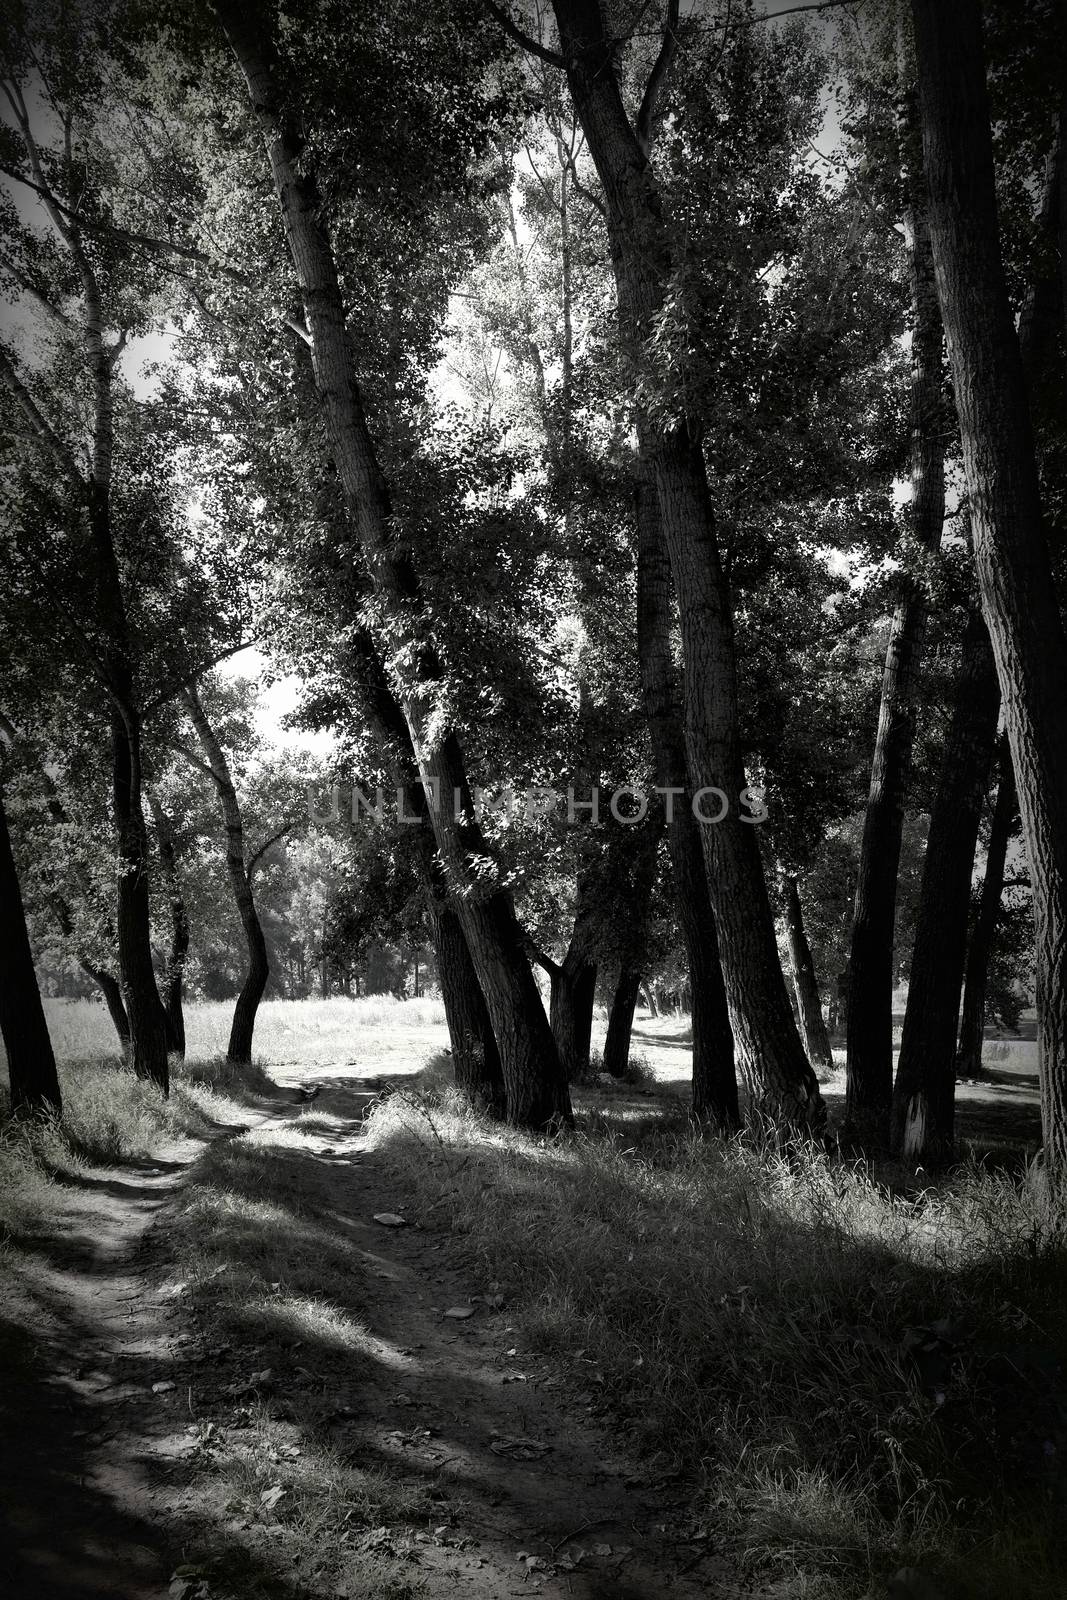 In summer forest, black and white image